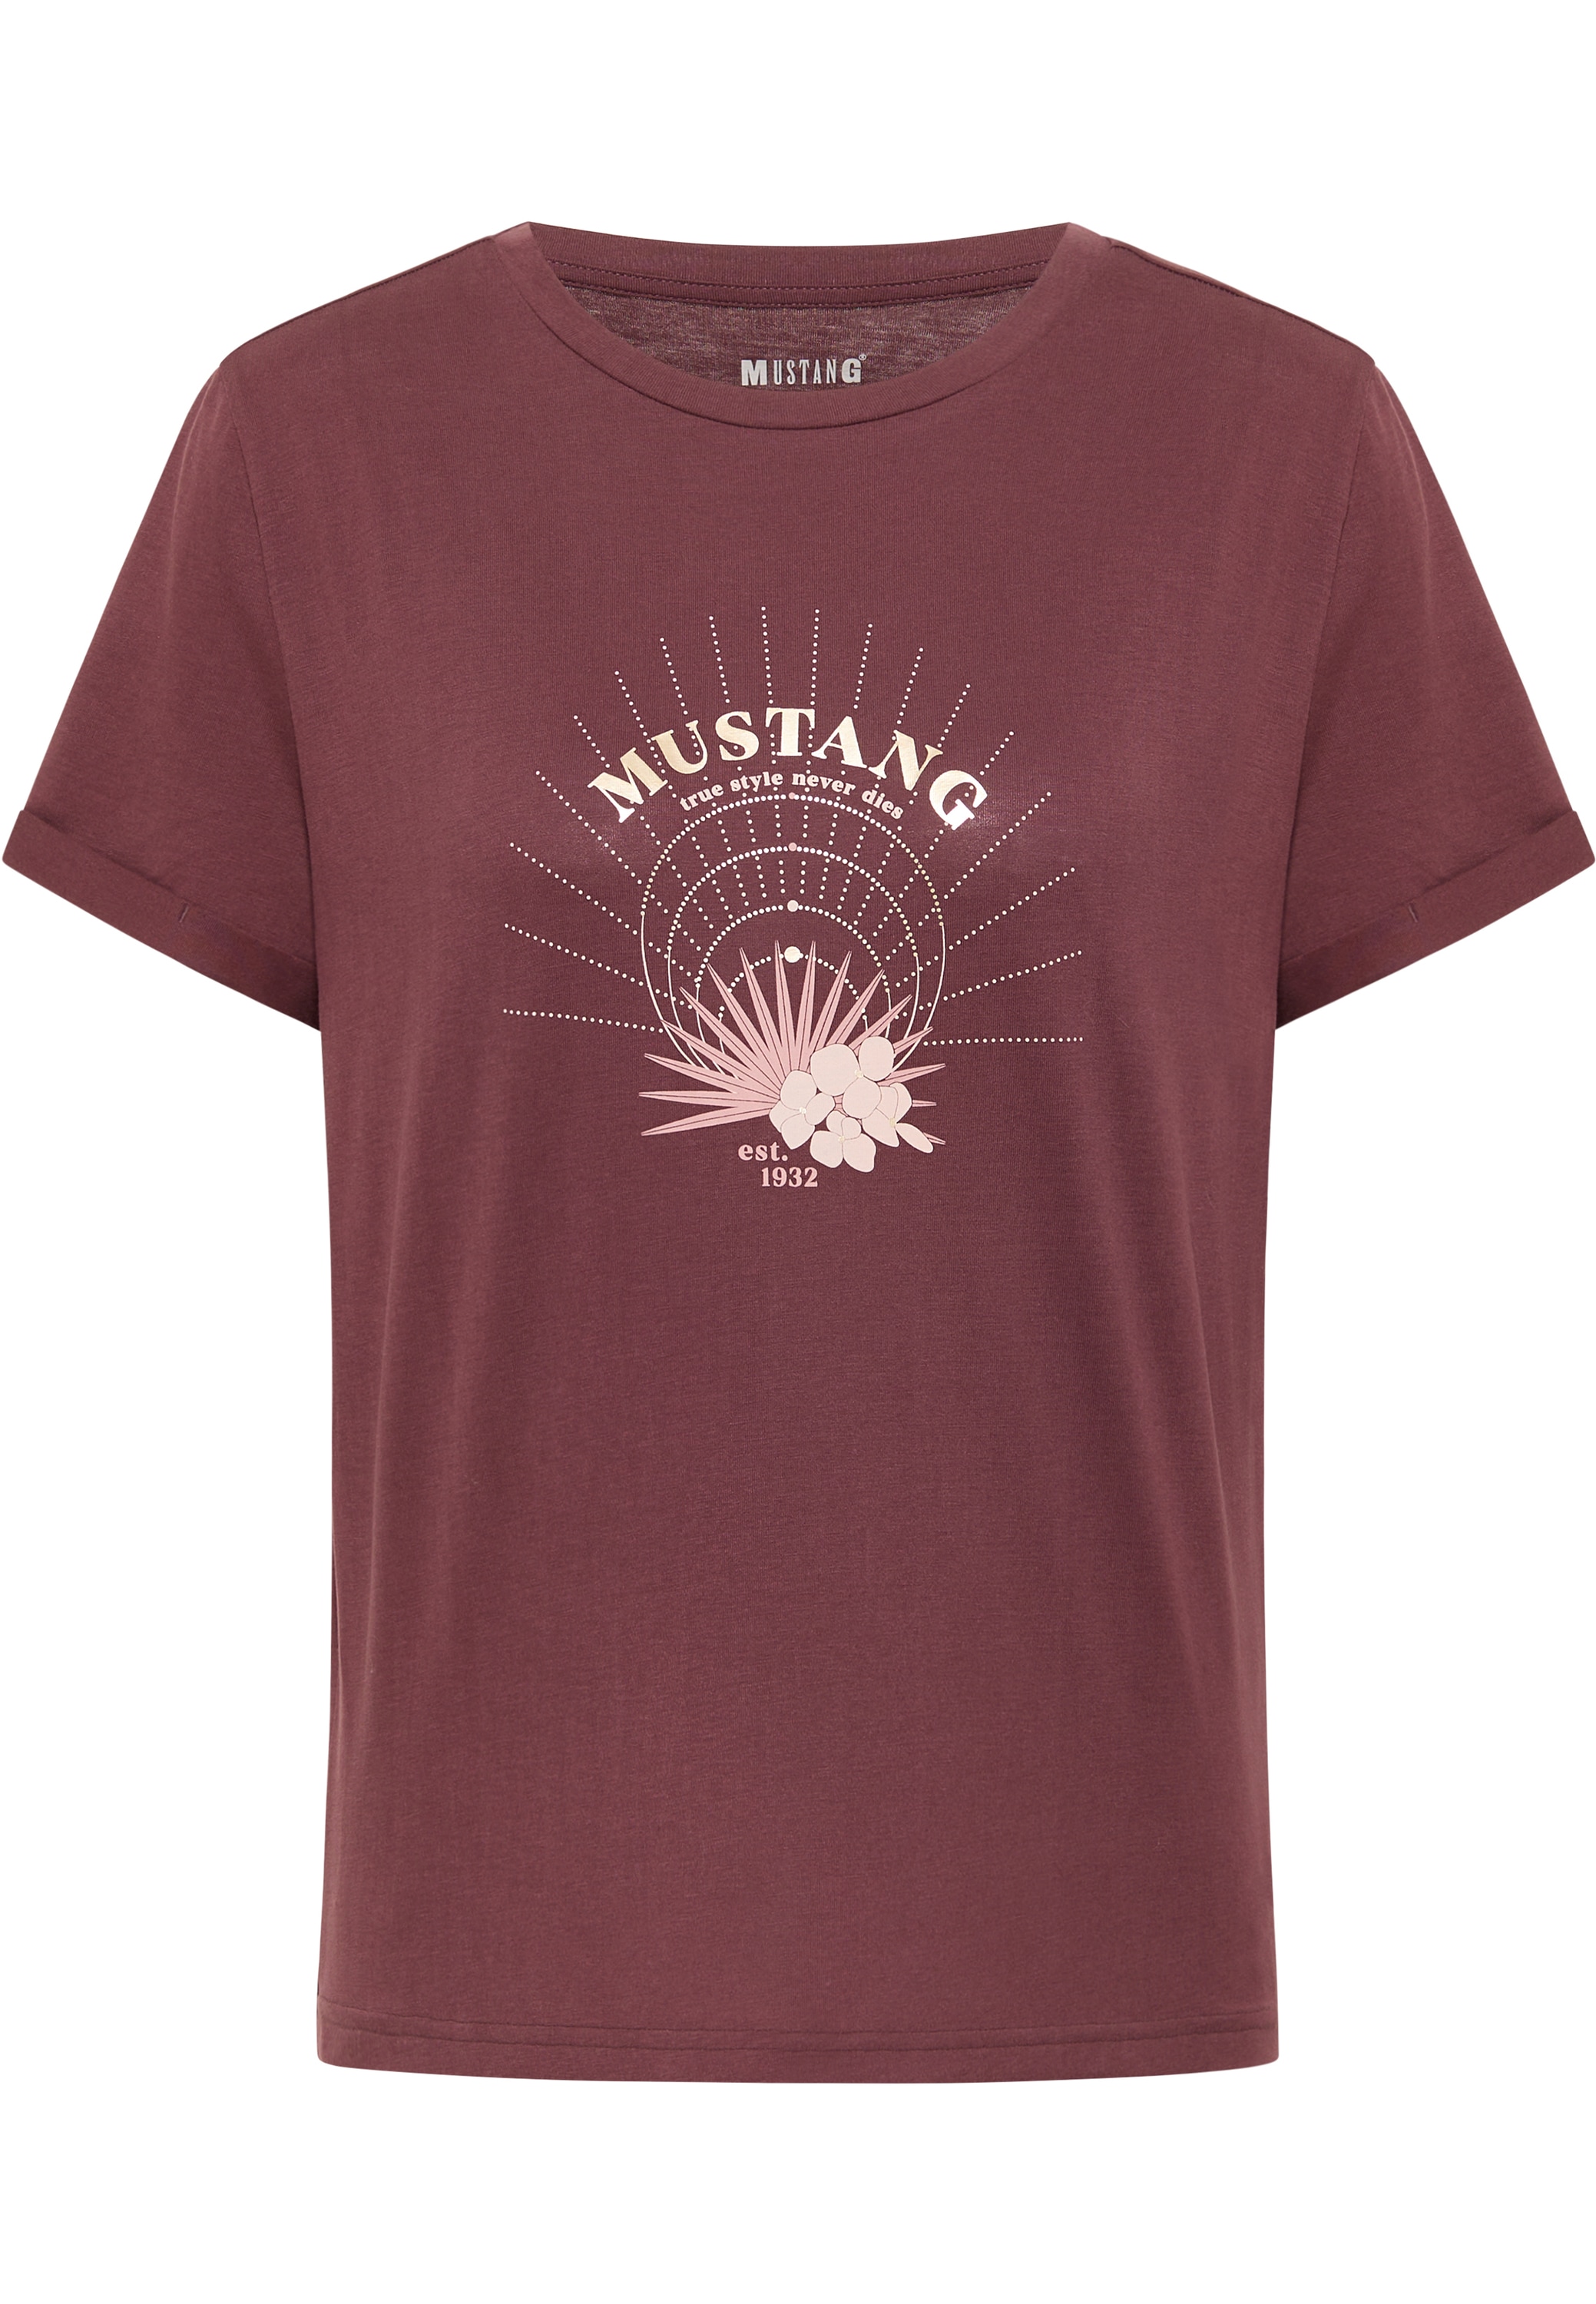 MUSTANG T-Shirt bei C OTTOversand Alina Foil« »Style